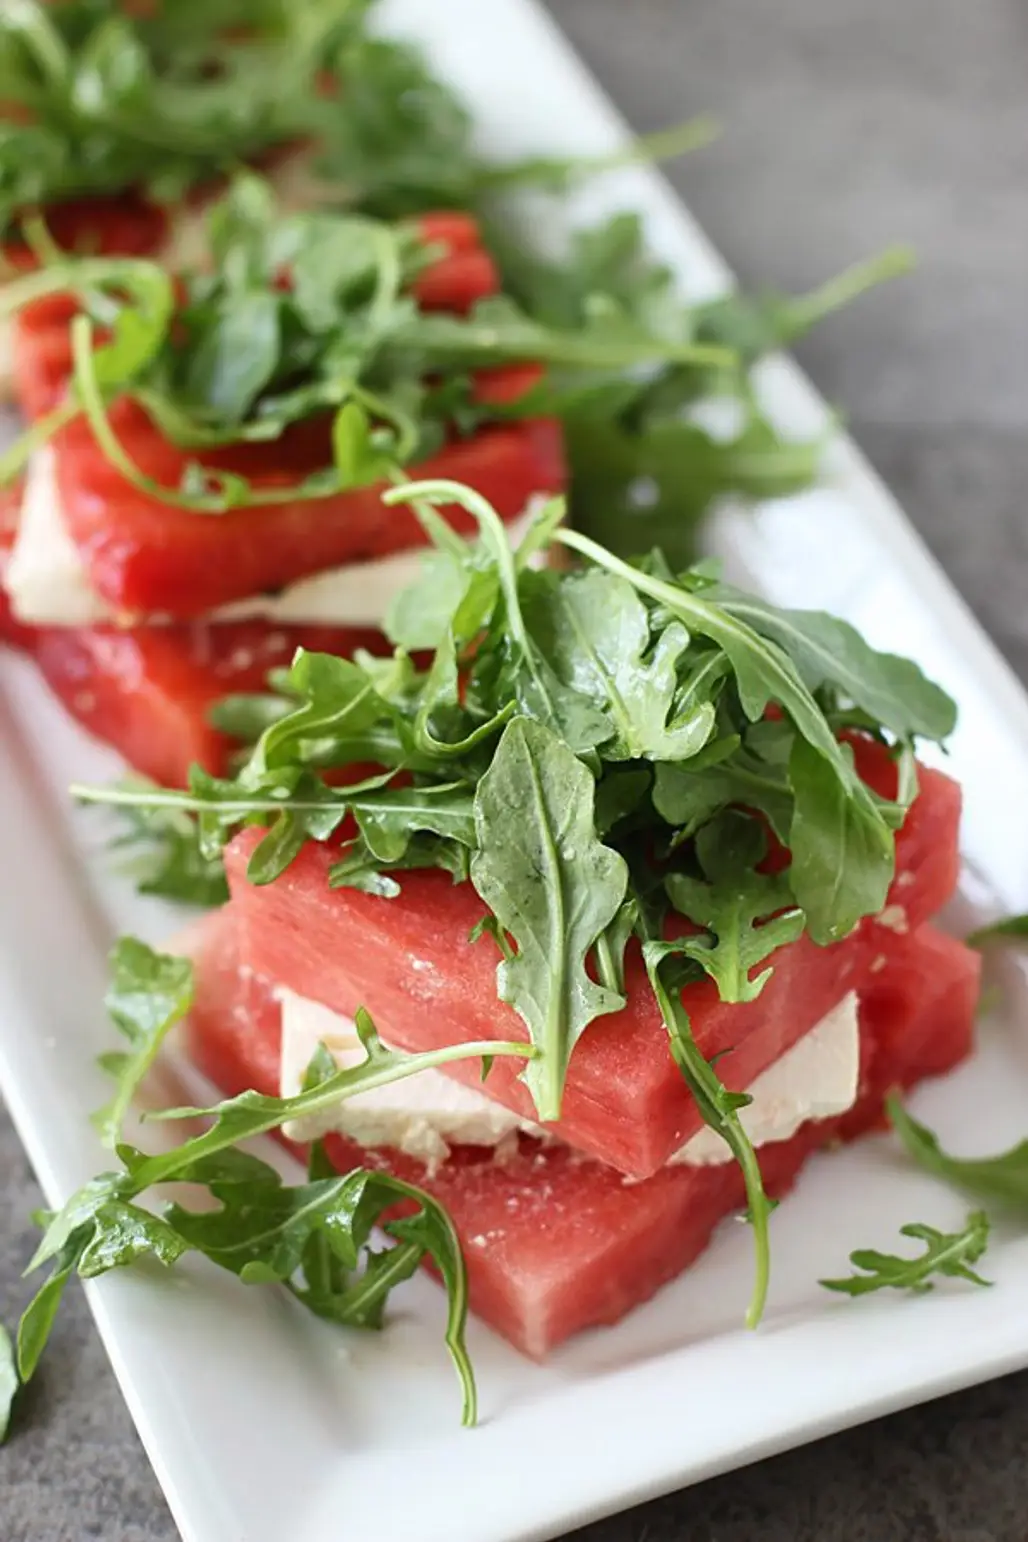 Grilled Watermelon Wedges Make for a Delicious Treat